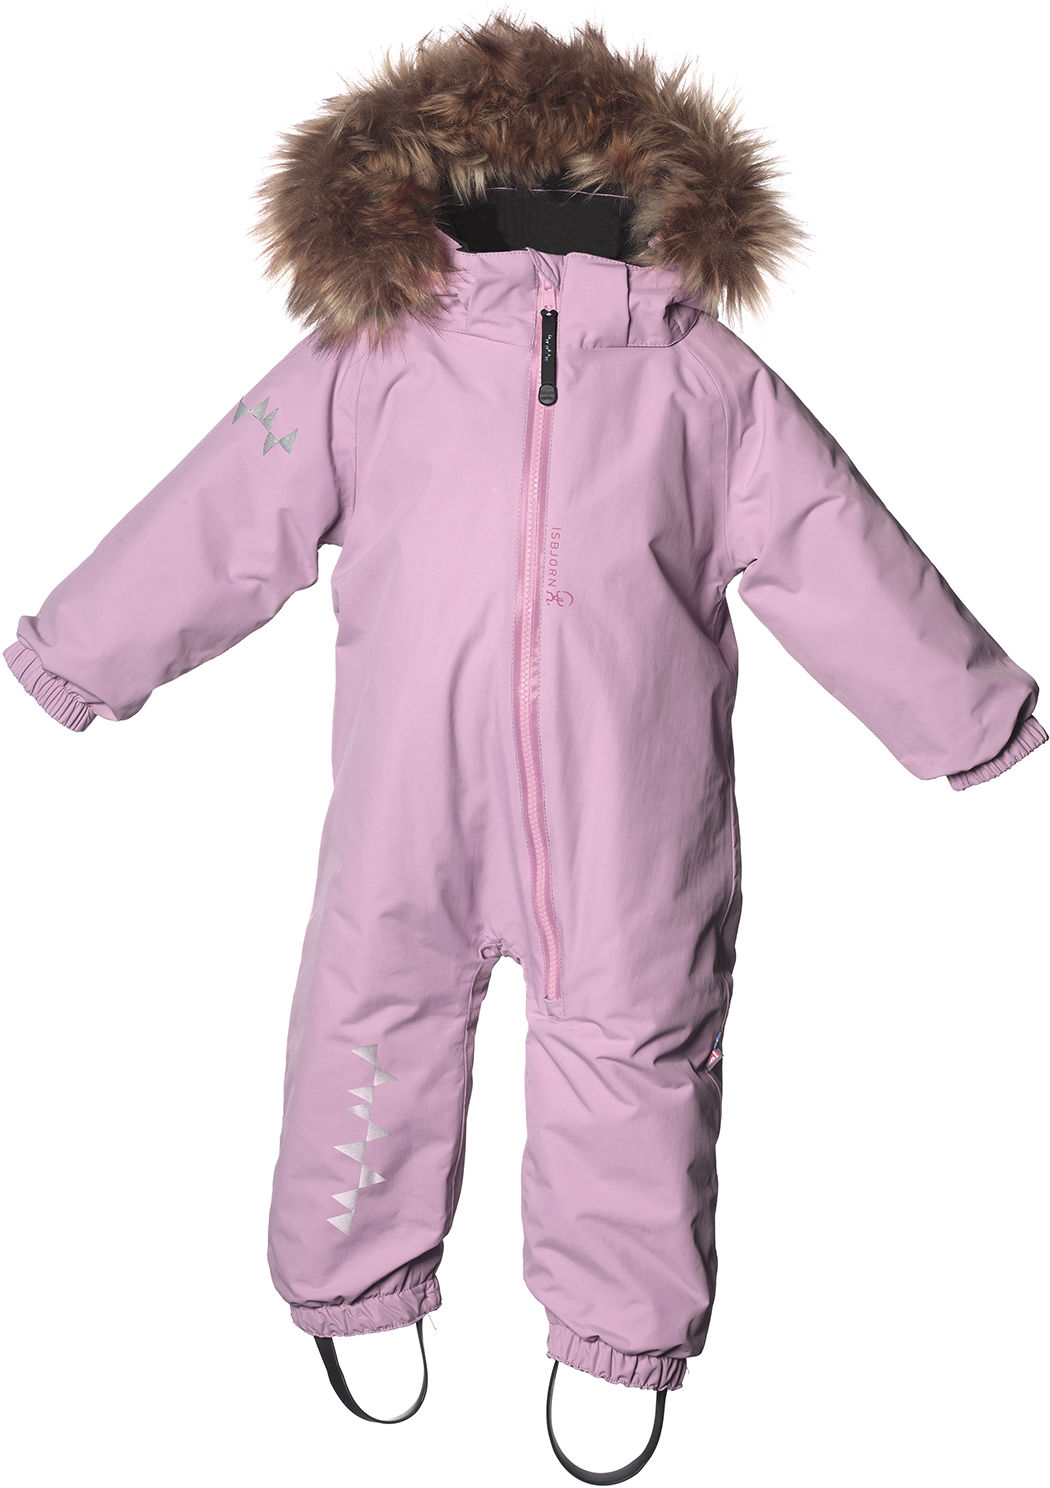 Isbjörn of Sweden Isbjörn Toddler Overall Frost Pink 80